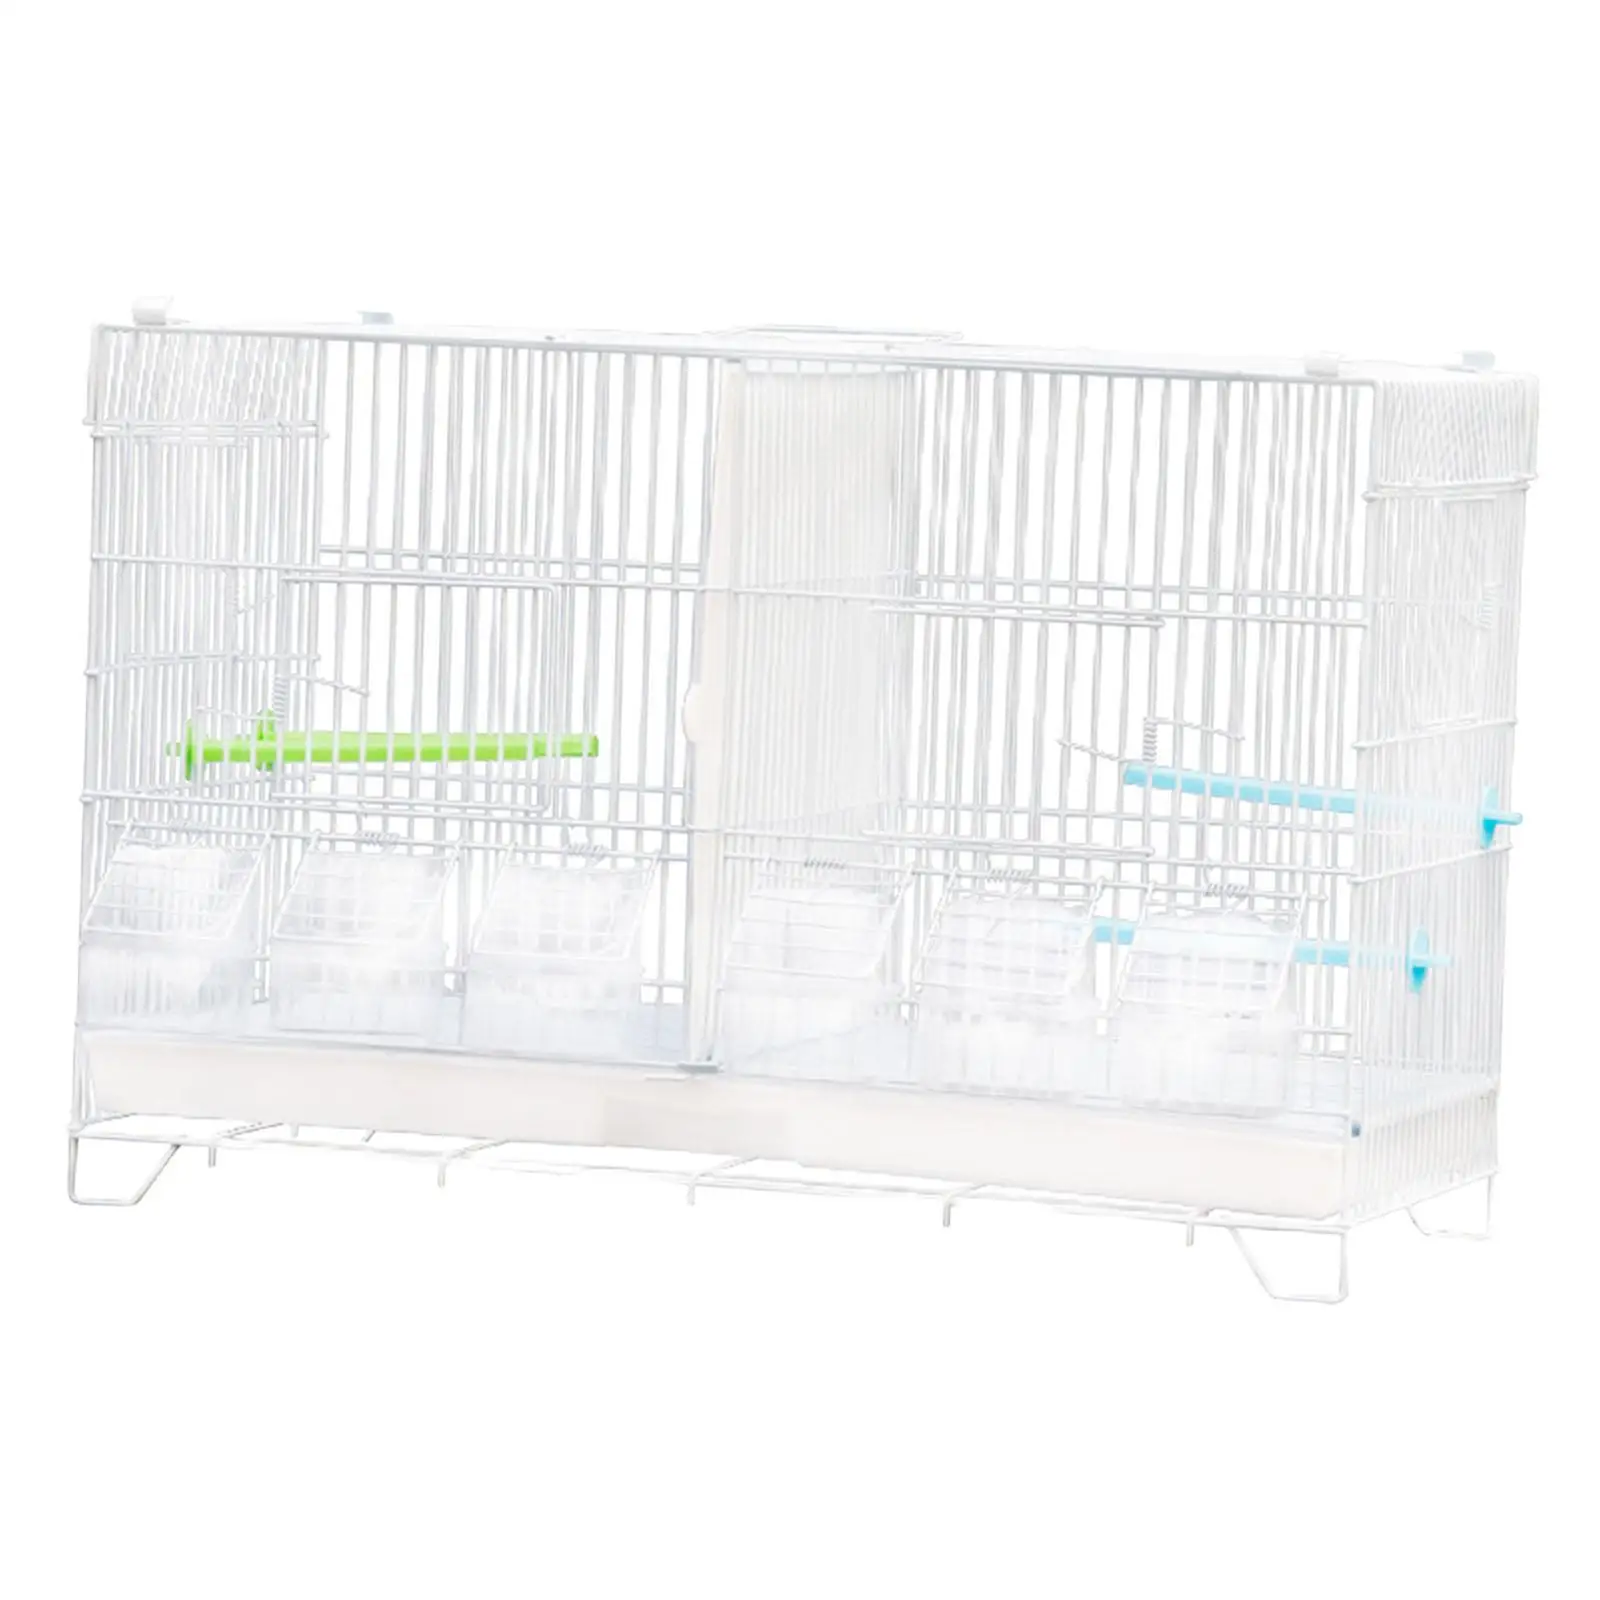 Metal Parrot Birdcage with Stand Pet Supplies Activity Center Breeding Cage Bird Cage for Lovebirds, Finches, Cockatiel